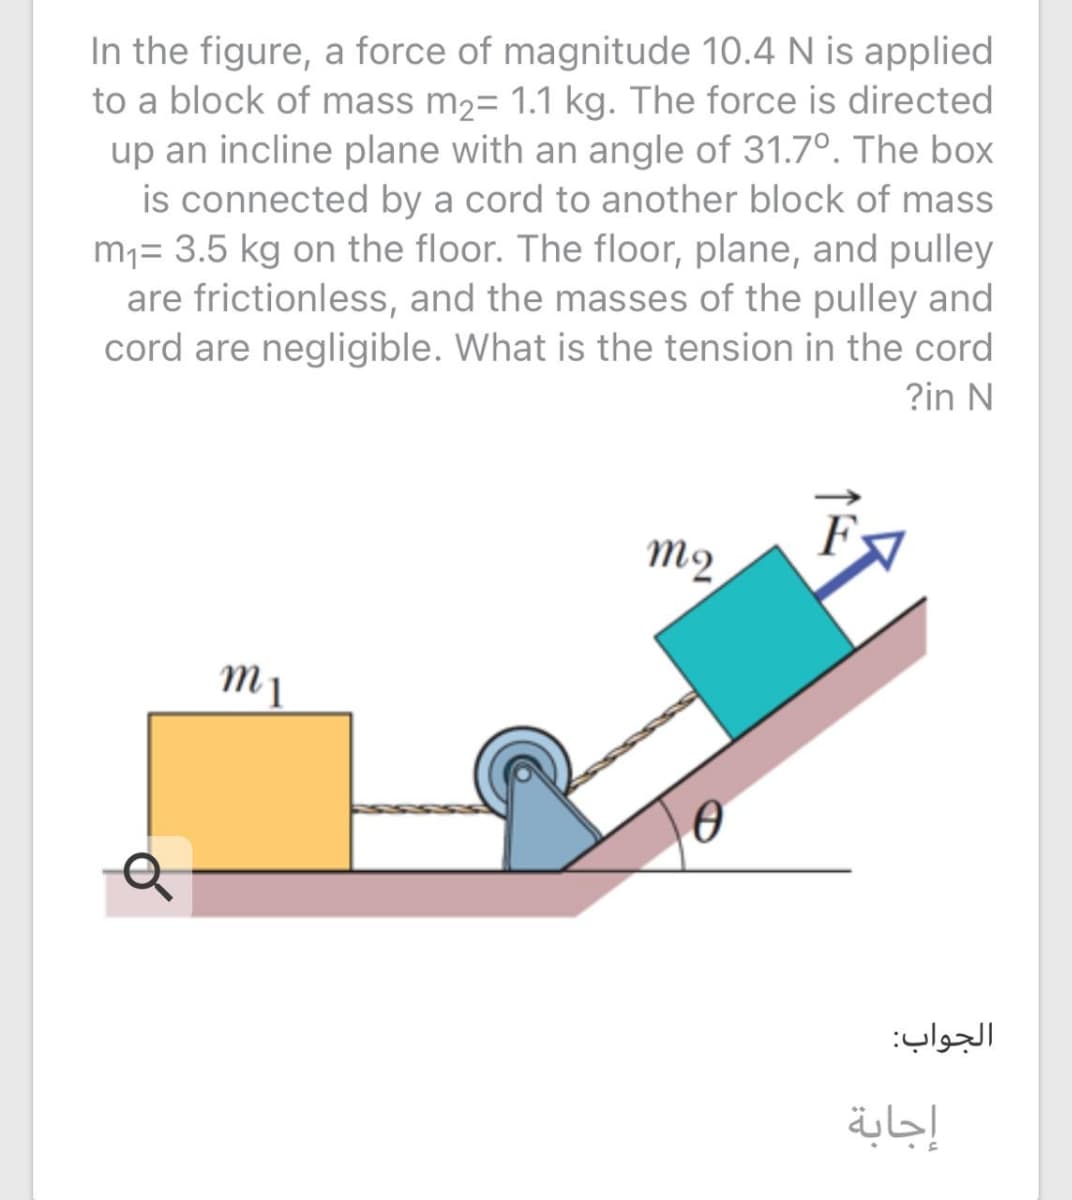 In the figure, a force of magnitude 10.4 N is applied
to a block of mass m2= 1.1 kg. The force is directed
up an incline plane with an angle of 31.7°. The box
is connected by a cord to another block of mass
m,= 3.5 kg on the floor. The floor, plane, and pulley
are frictionless, and the masses of the pulley and
cord are negligible. What is the tension in the cord
?in N
m2
m 1
الجواب:
إجابة
